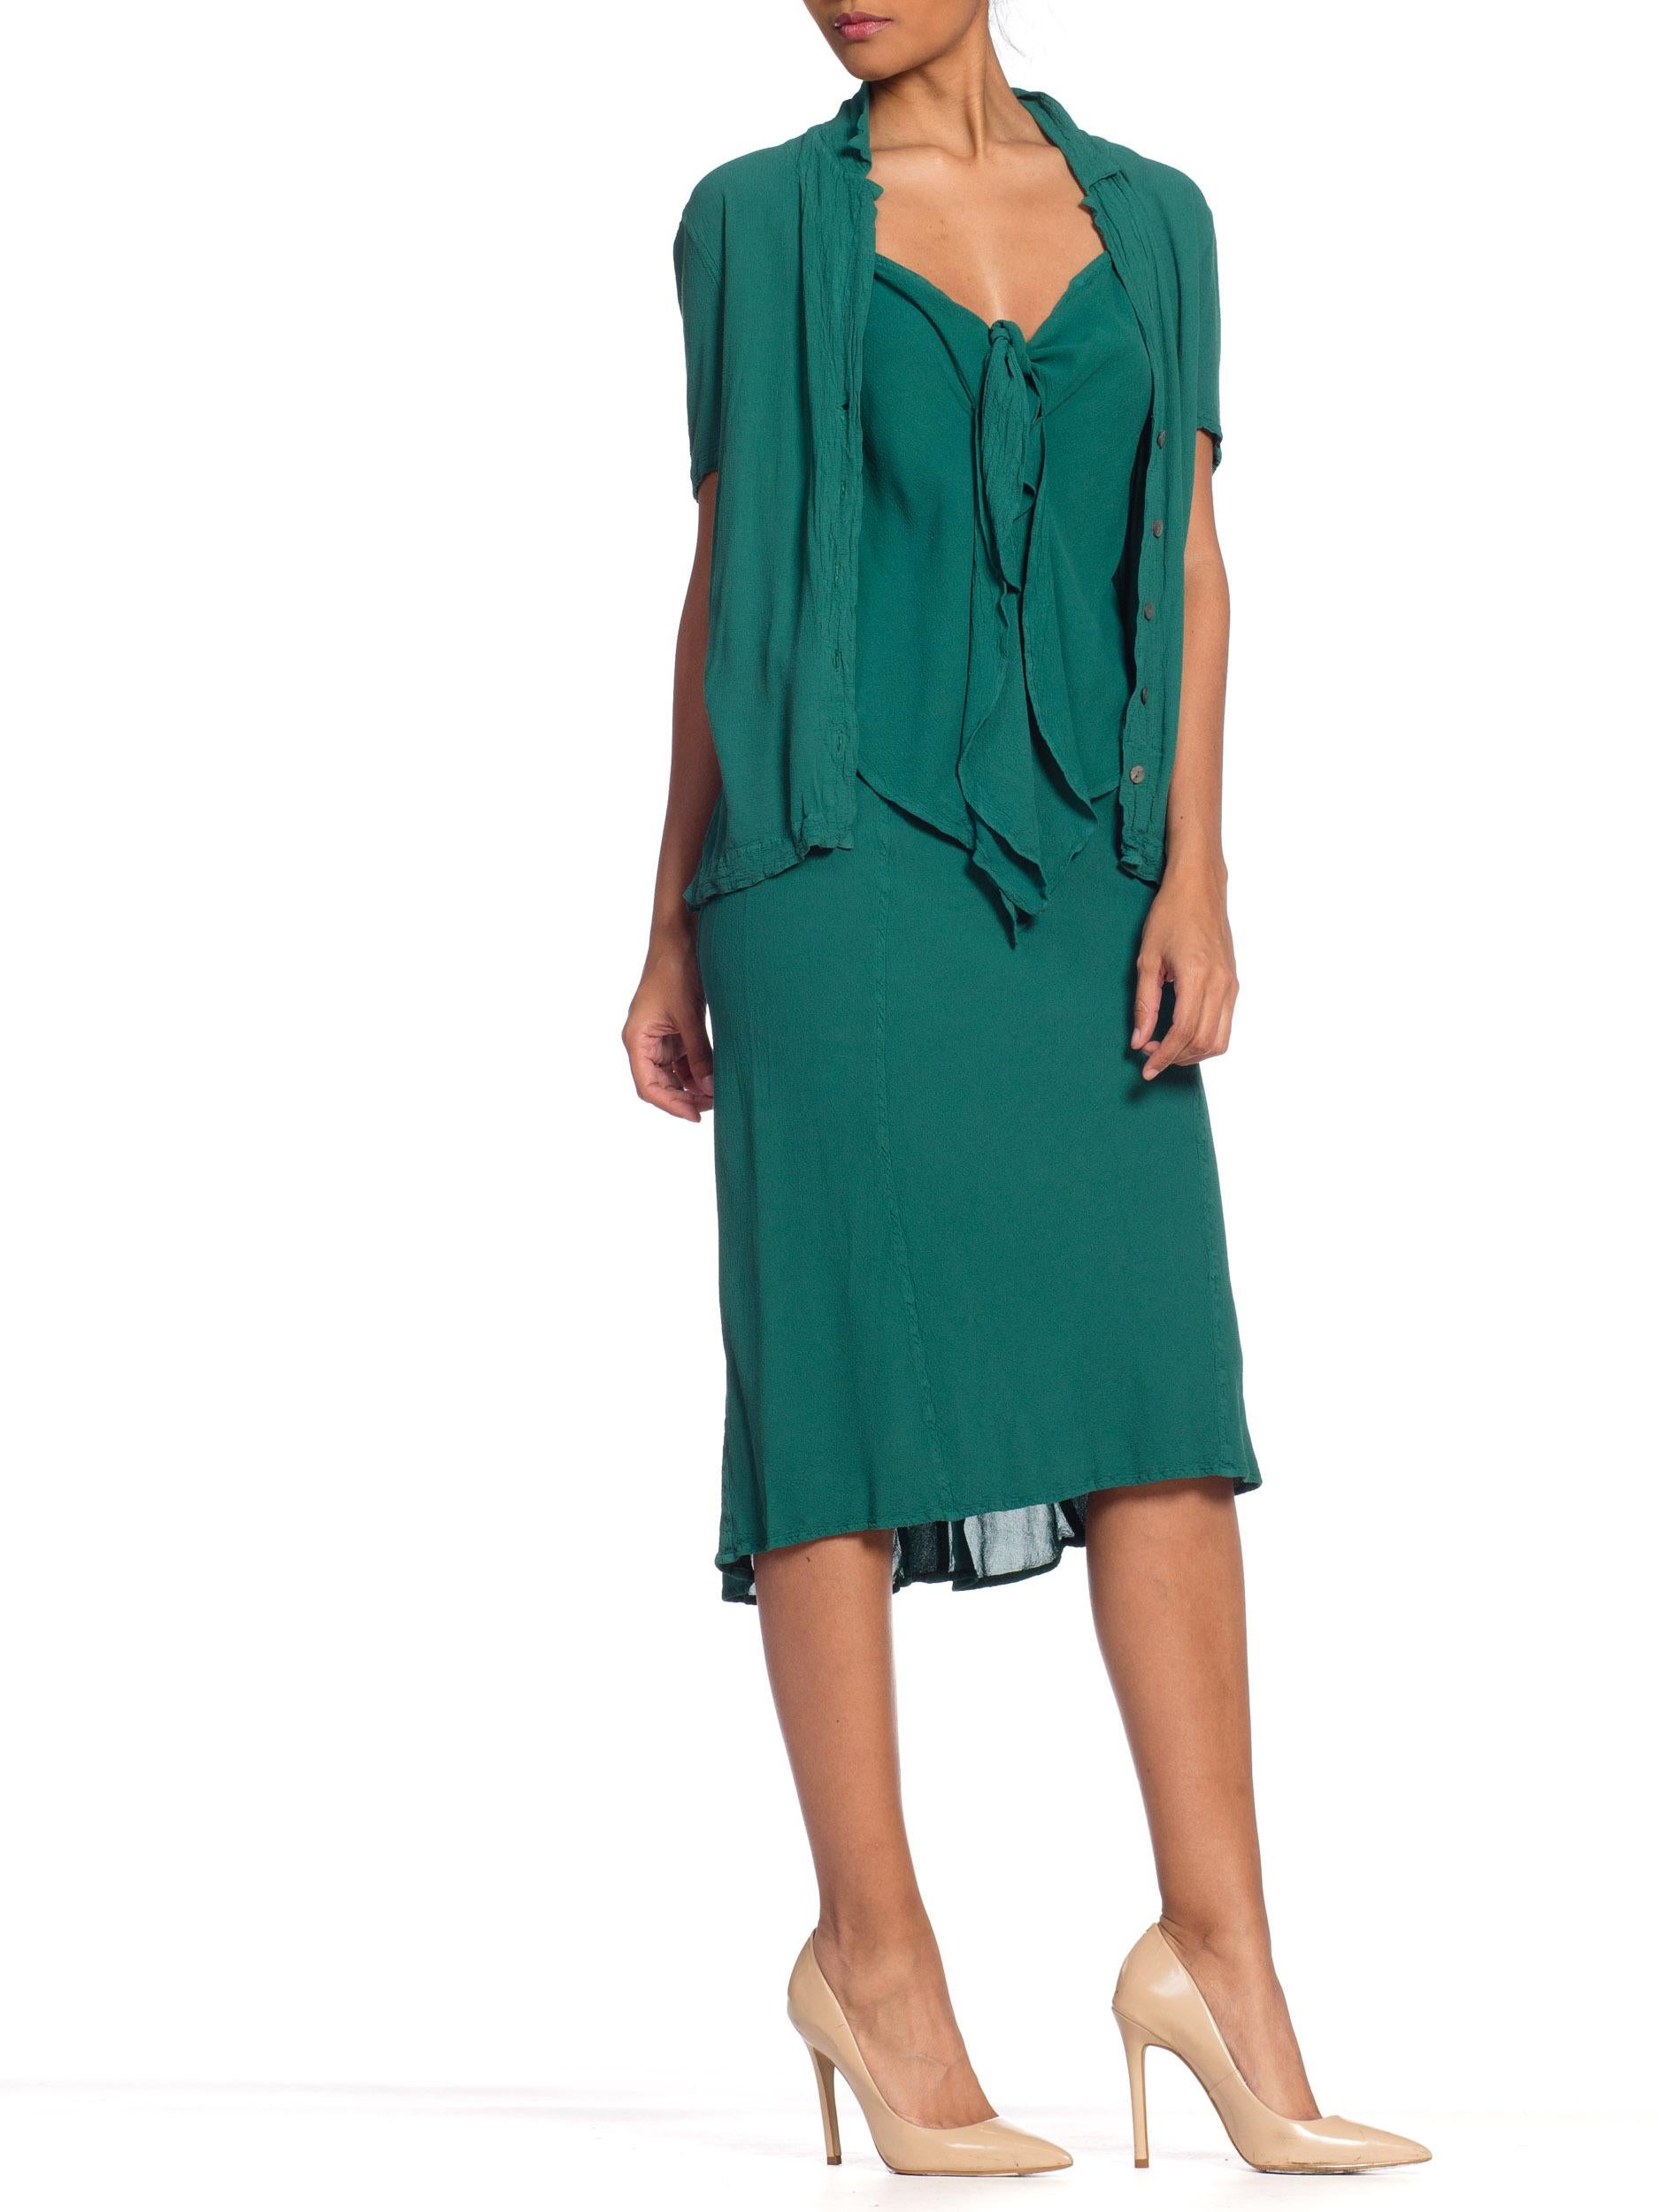 Women's 1990s Ghost Bottle Green Bias Rayon Crepe 3-Piece Skirt, Cami & Top